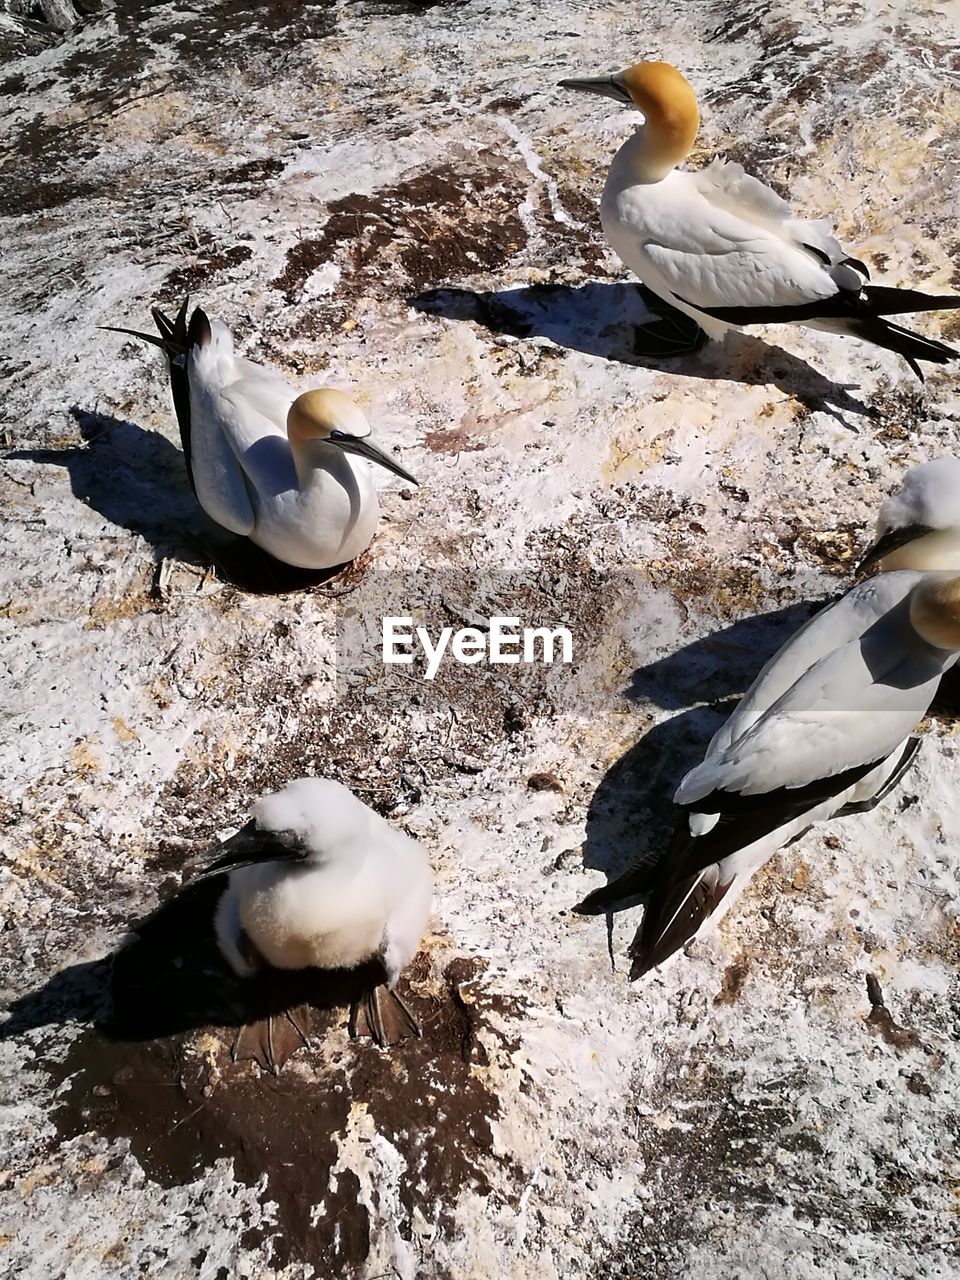 HIGH ANGLE VIEW OF SEAGULLS ON BEACH